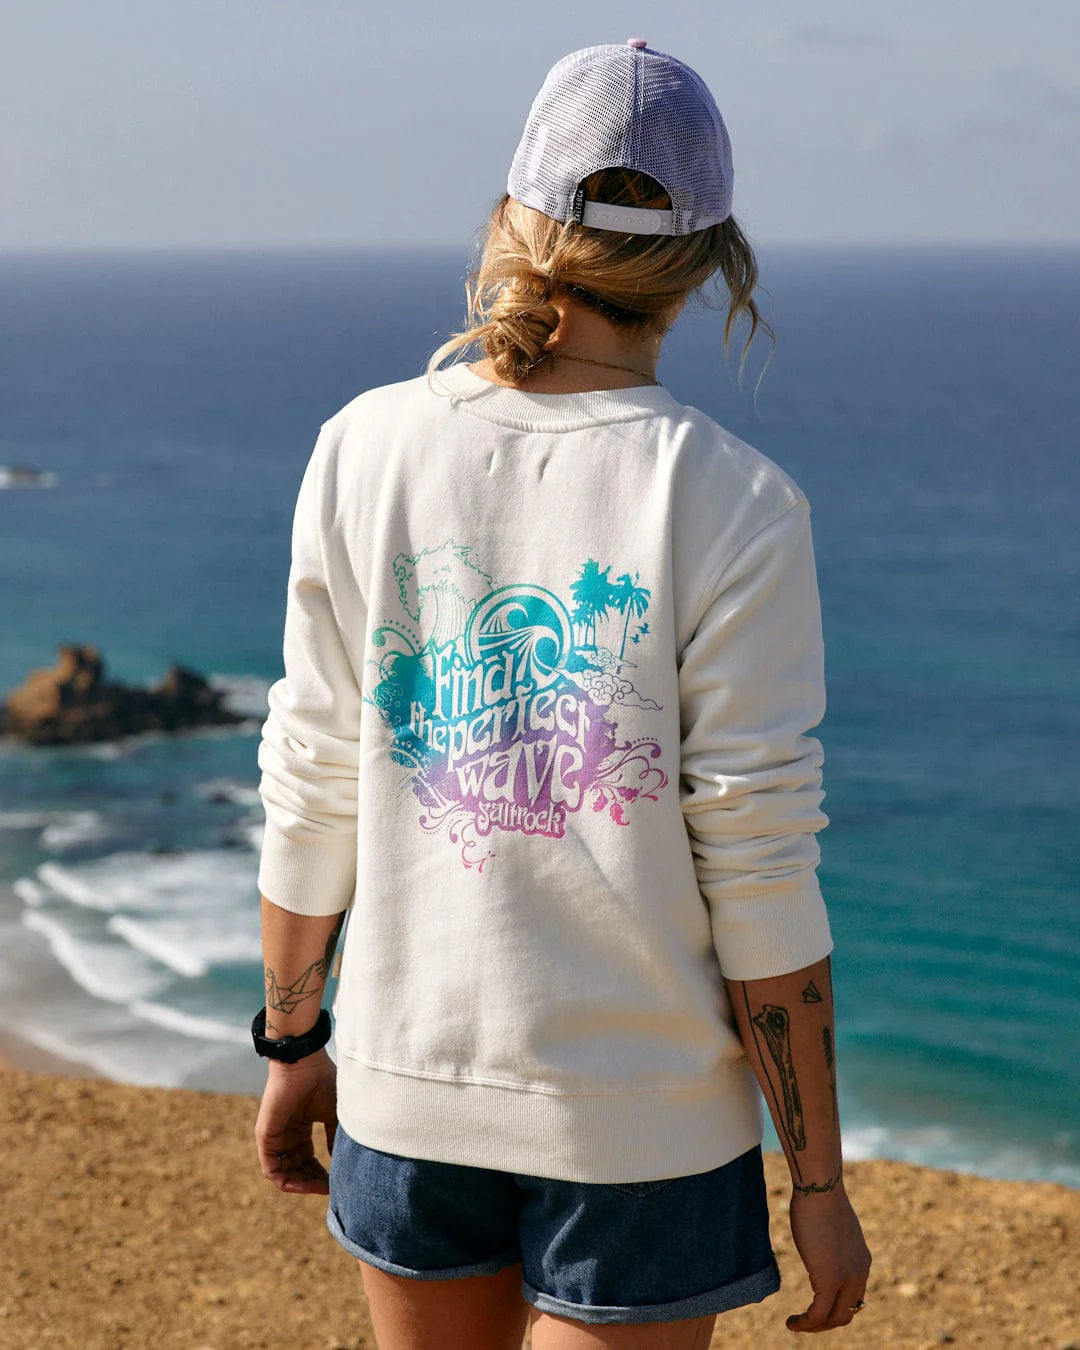 SALTROCK 'FIND THE PERFECT WAVE' WOMENS SWEAT - WHITE